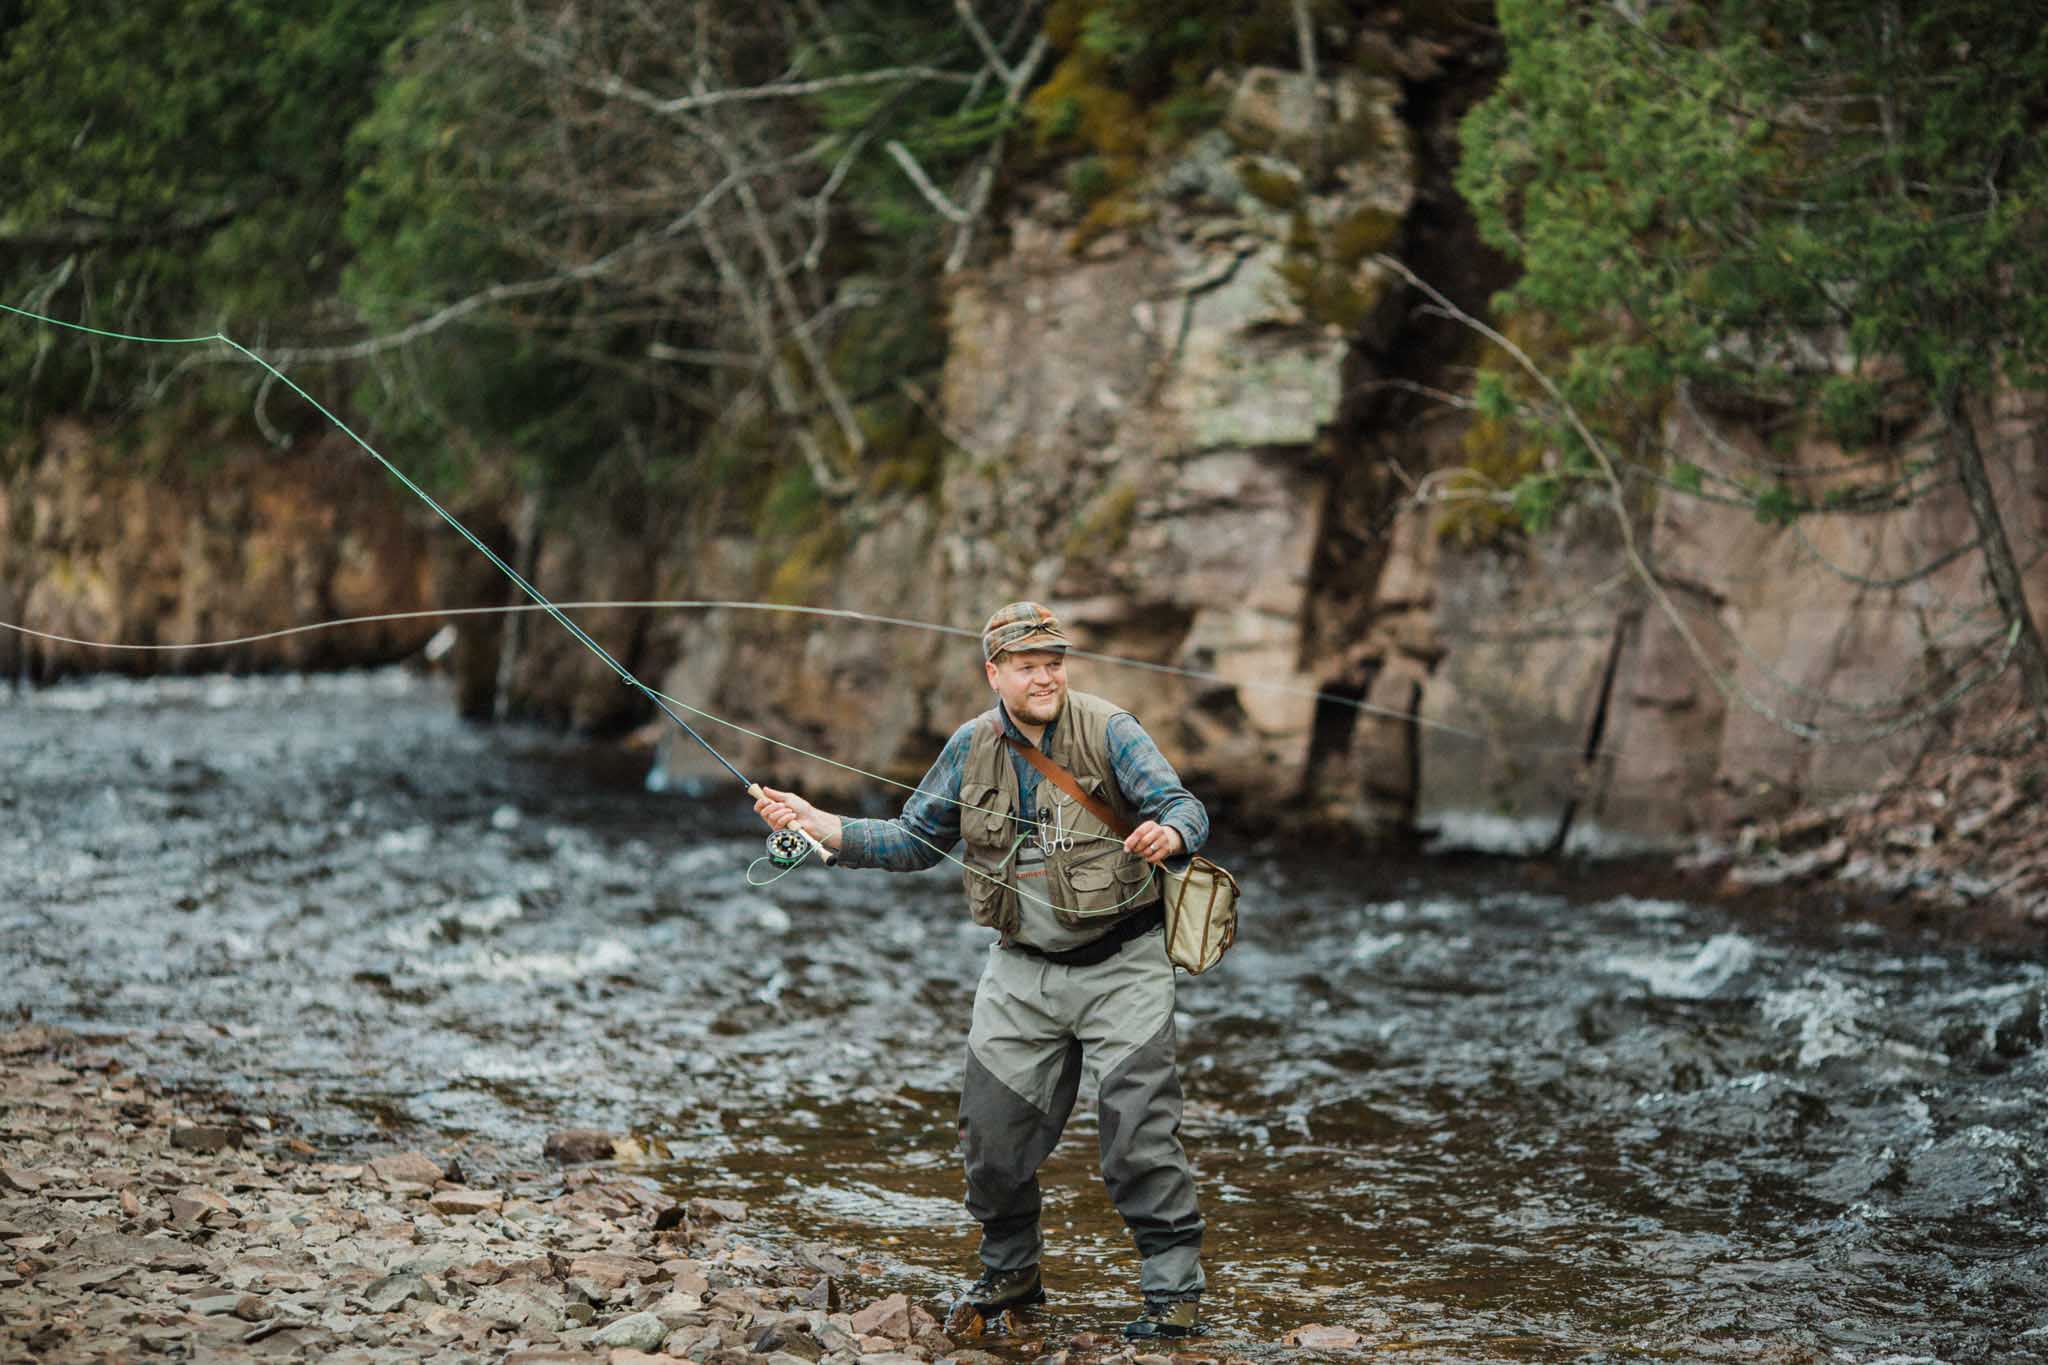 Flyrod lifestyle product photography.